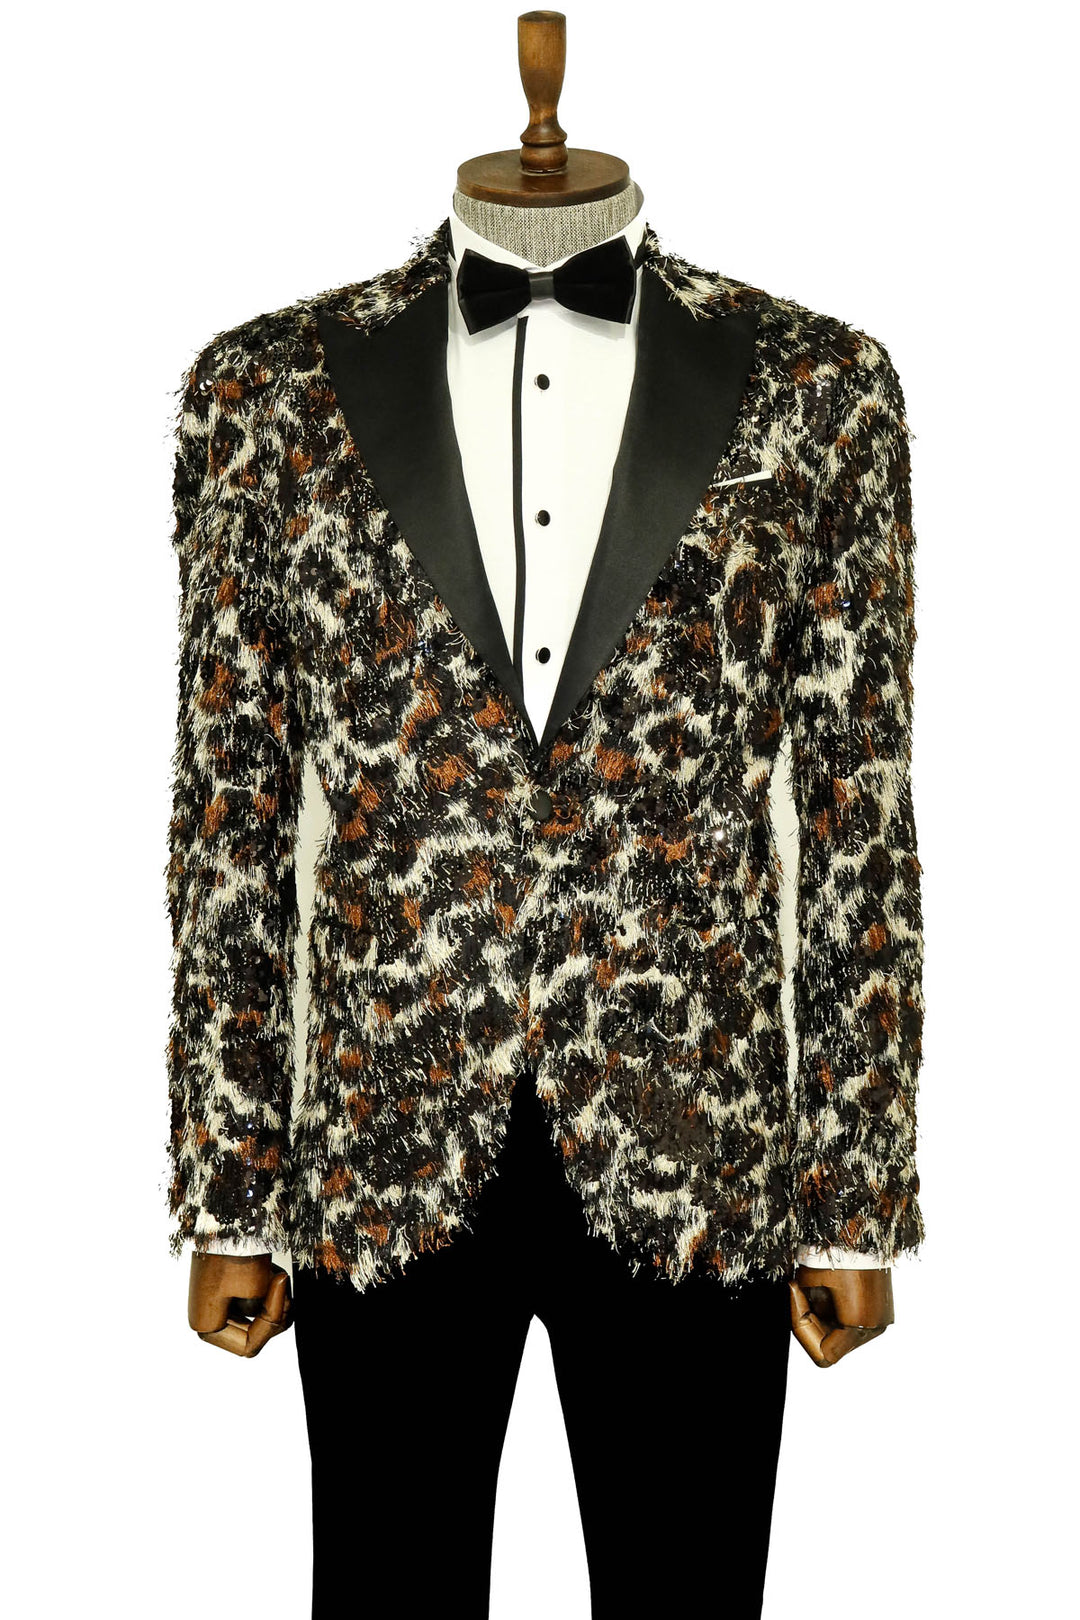 White and Black Feather Patterned Men's Prom Jacket - Wessi